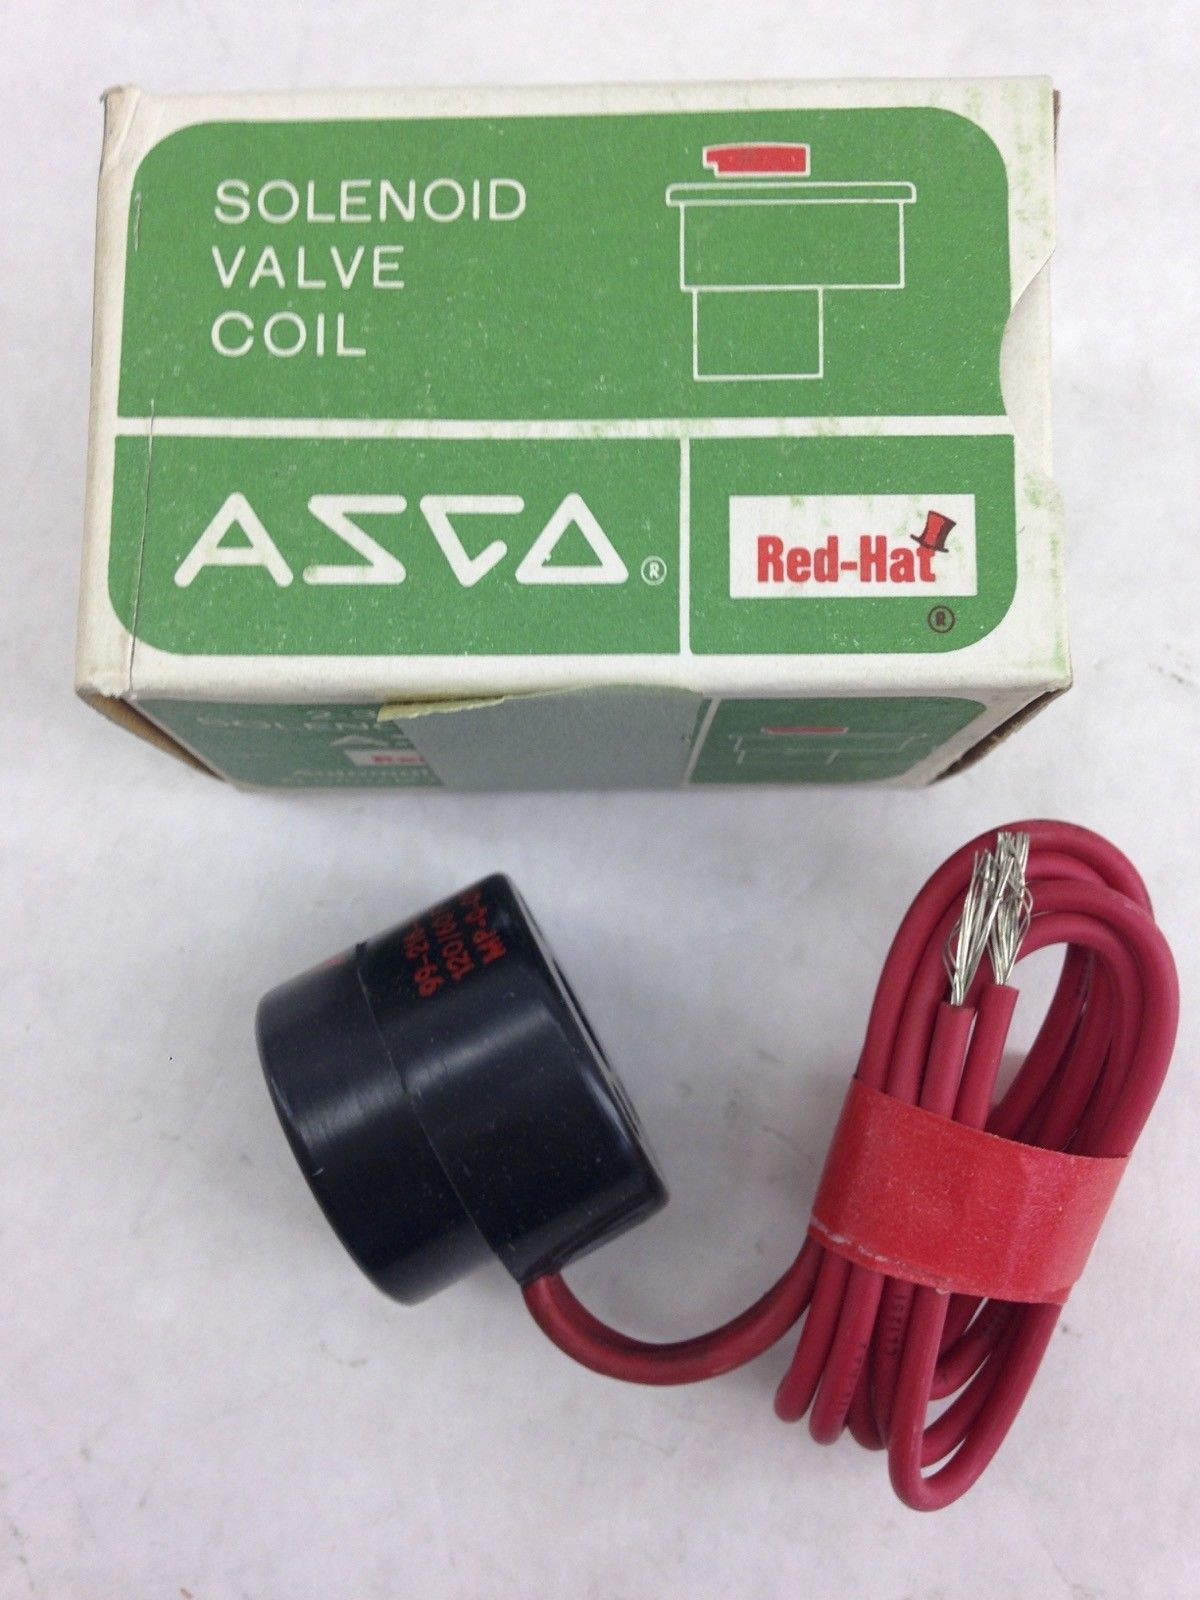 ASCO RED HAT 99-216-1-D SOLENOID VALVE COIL (A828) 1